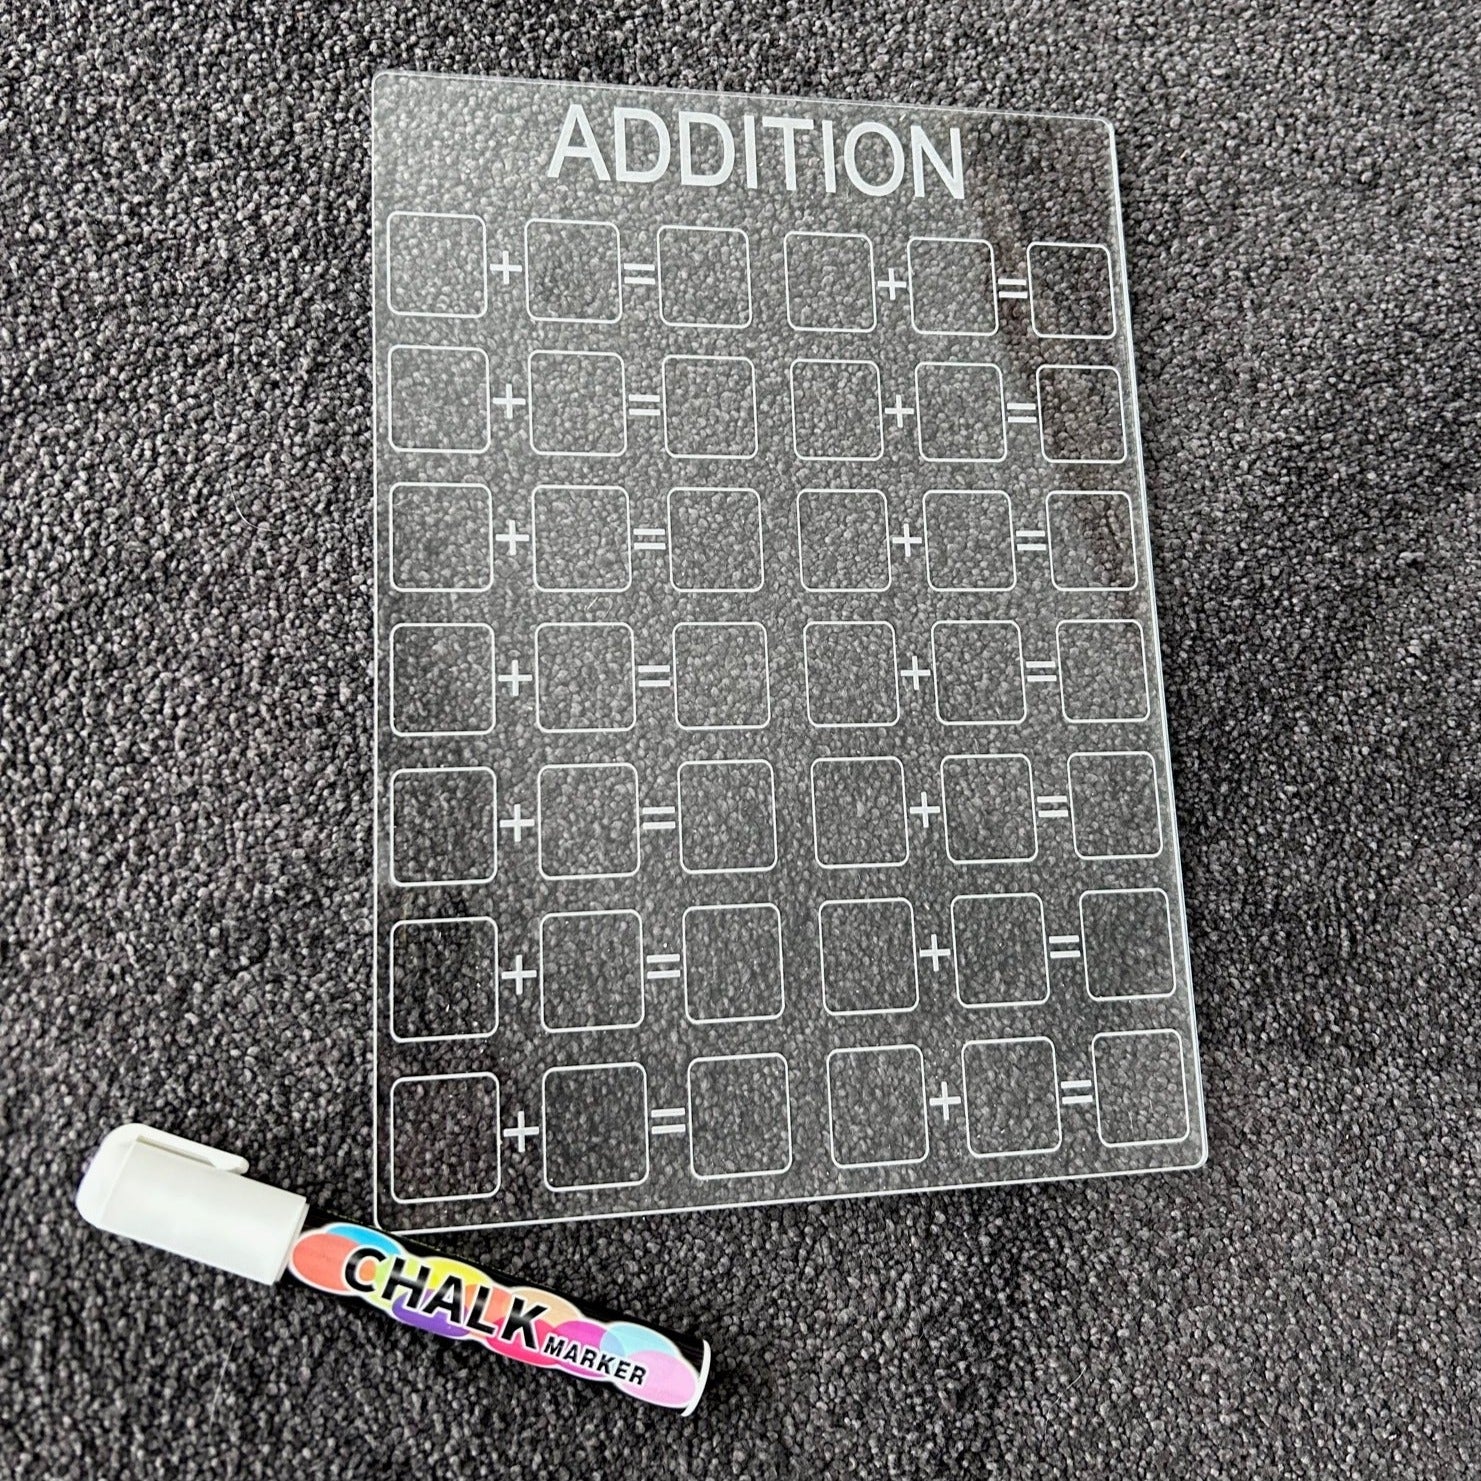 Addition Maths Equation Board with Chalk Marker